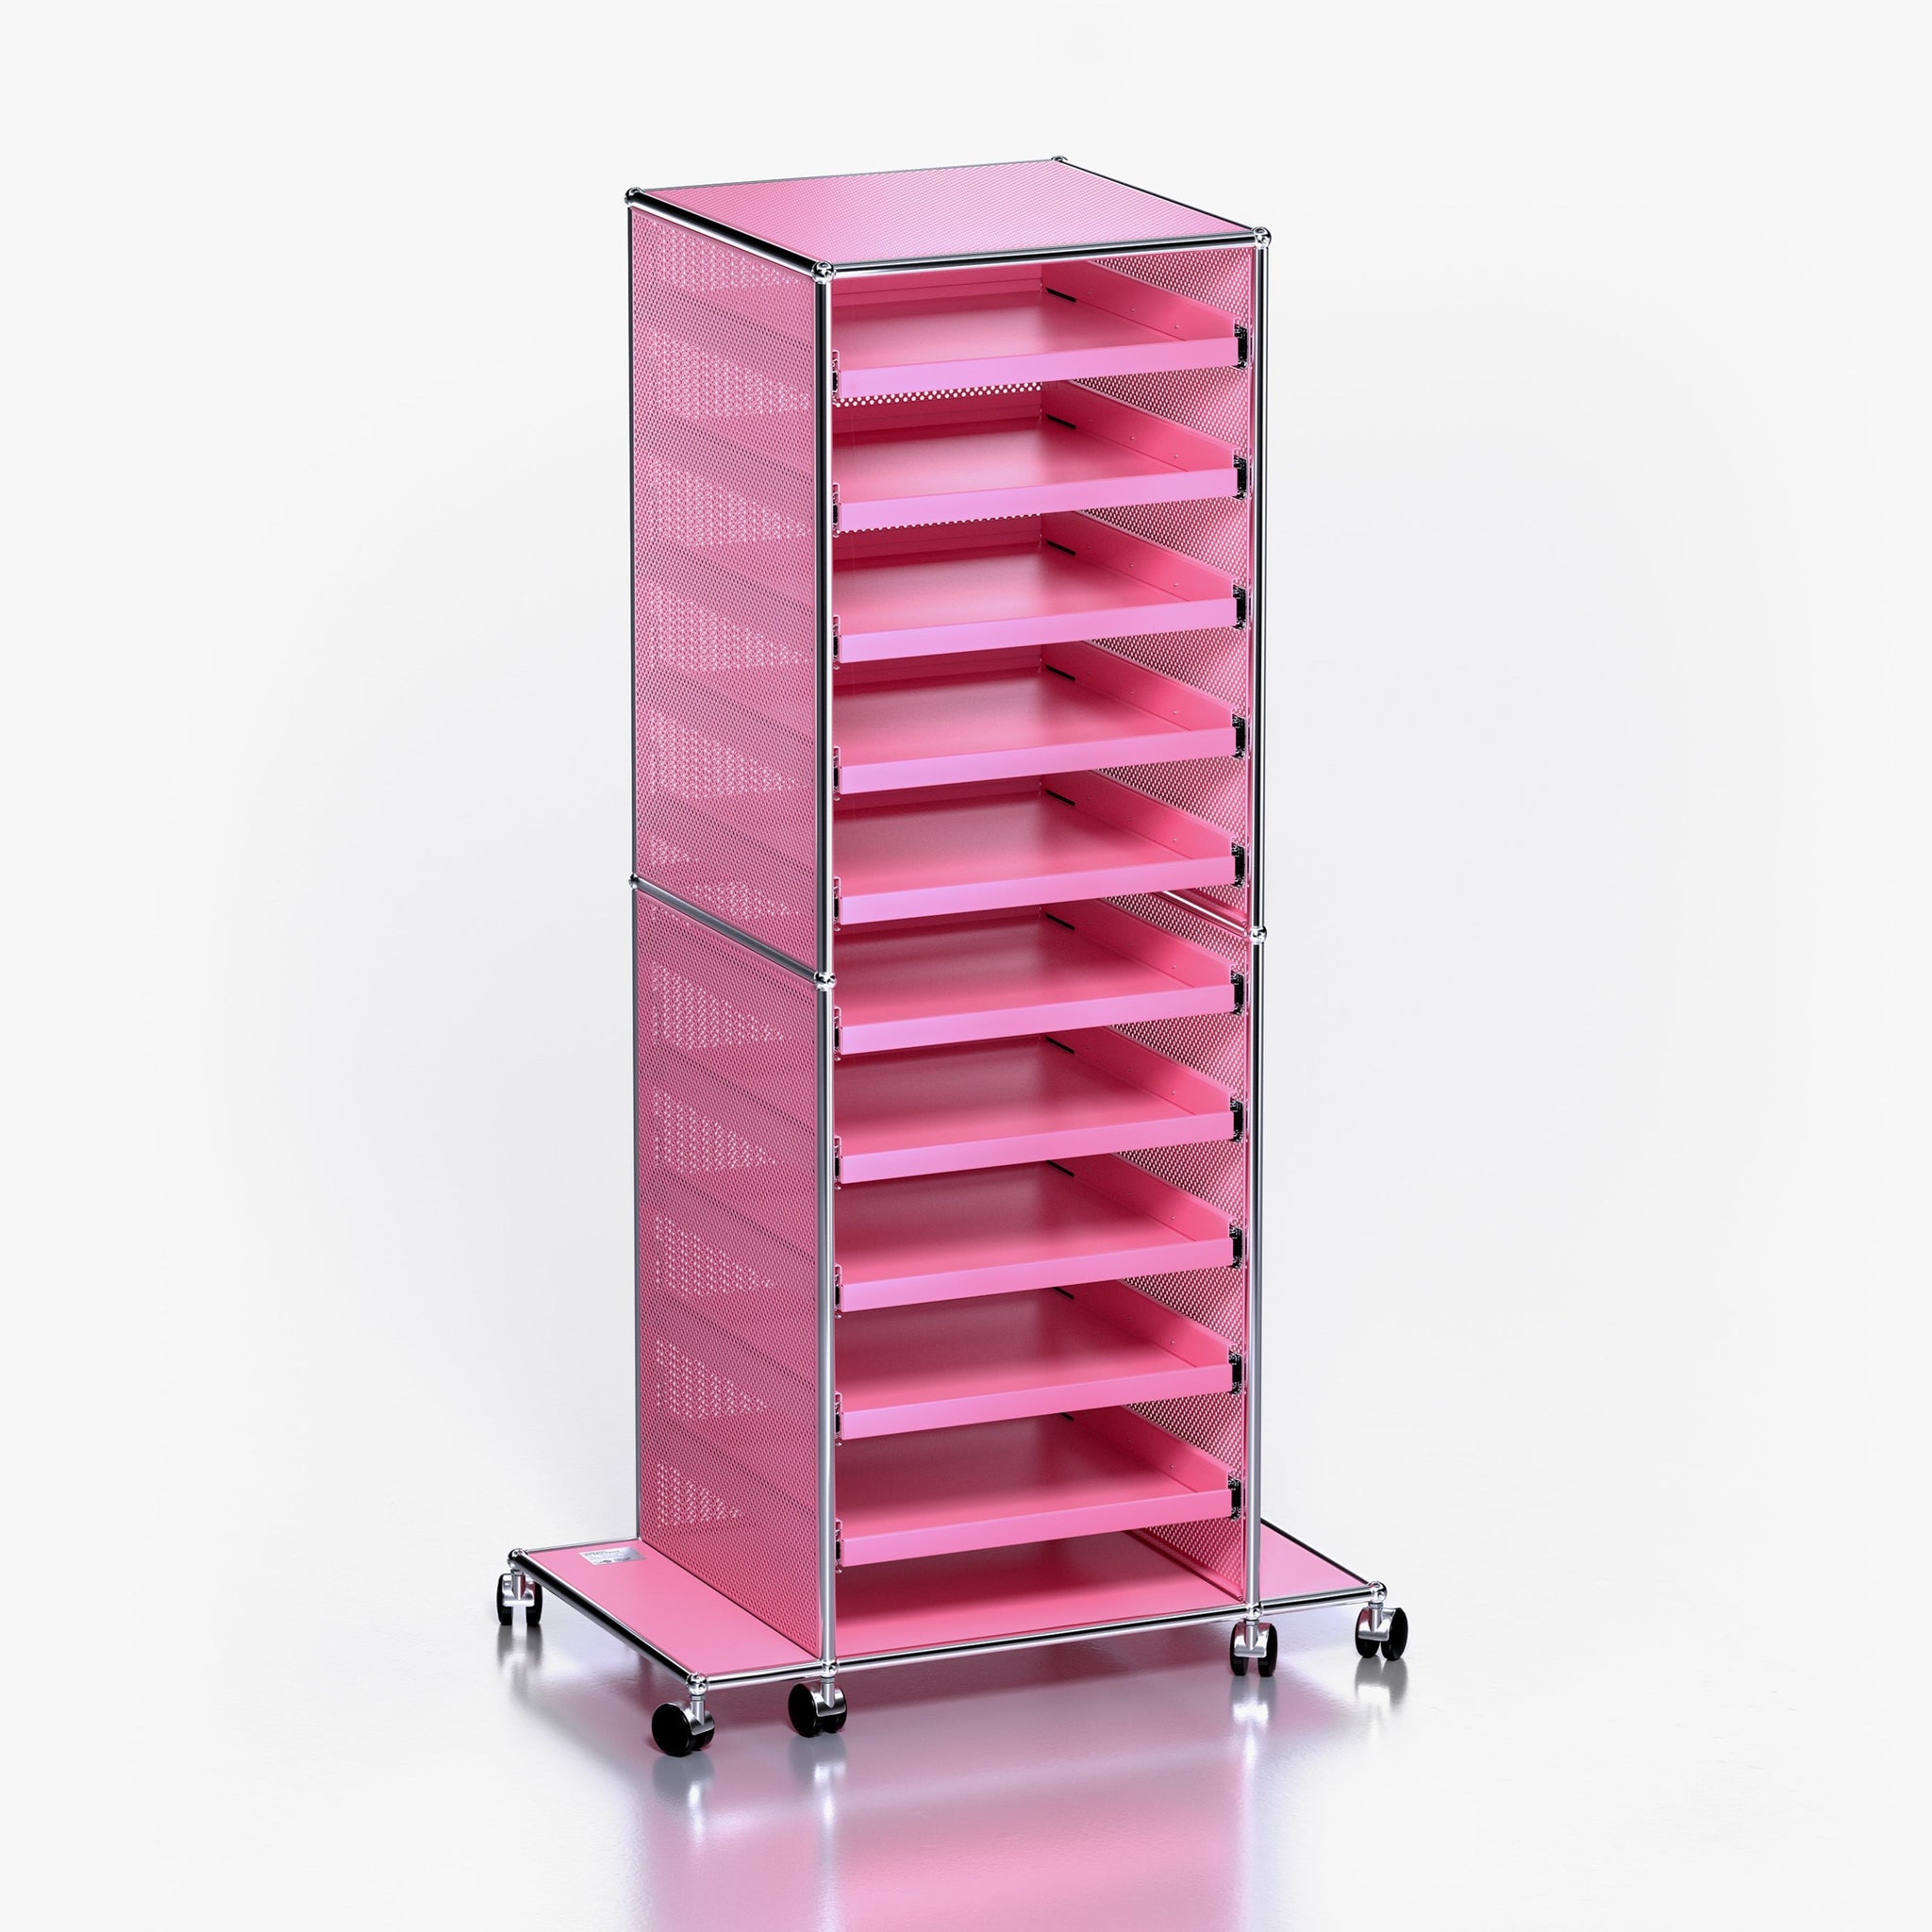 Tower B (Archive): Rolling Tower Shelf in Downtown Pink (Side View)